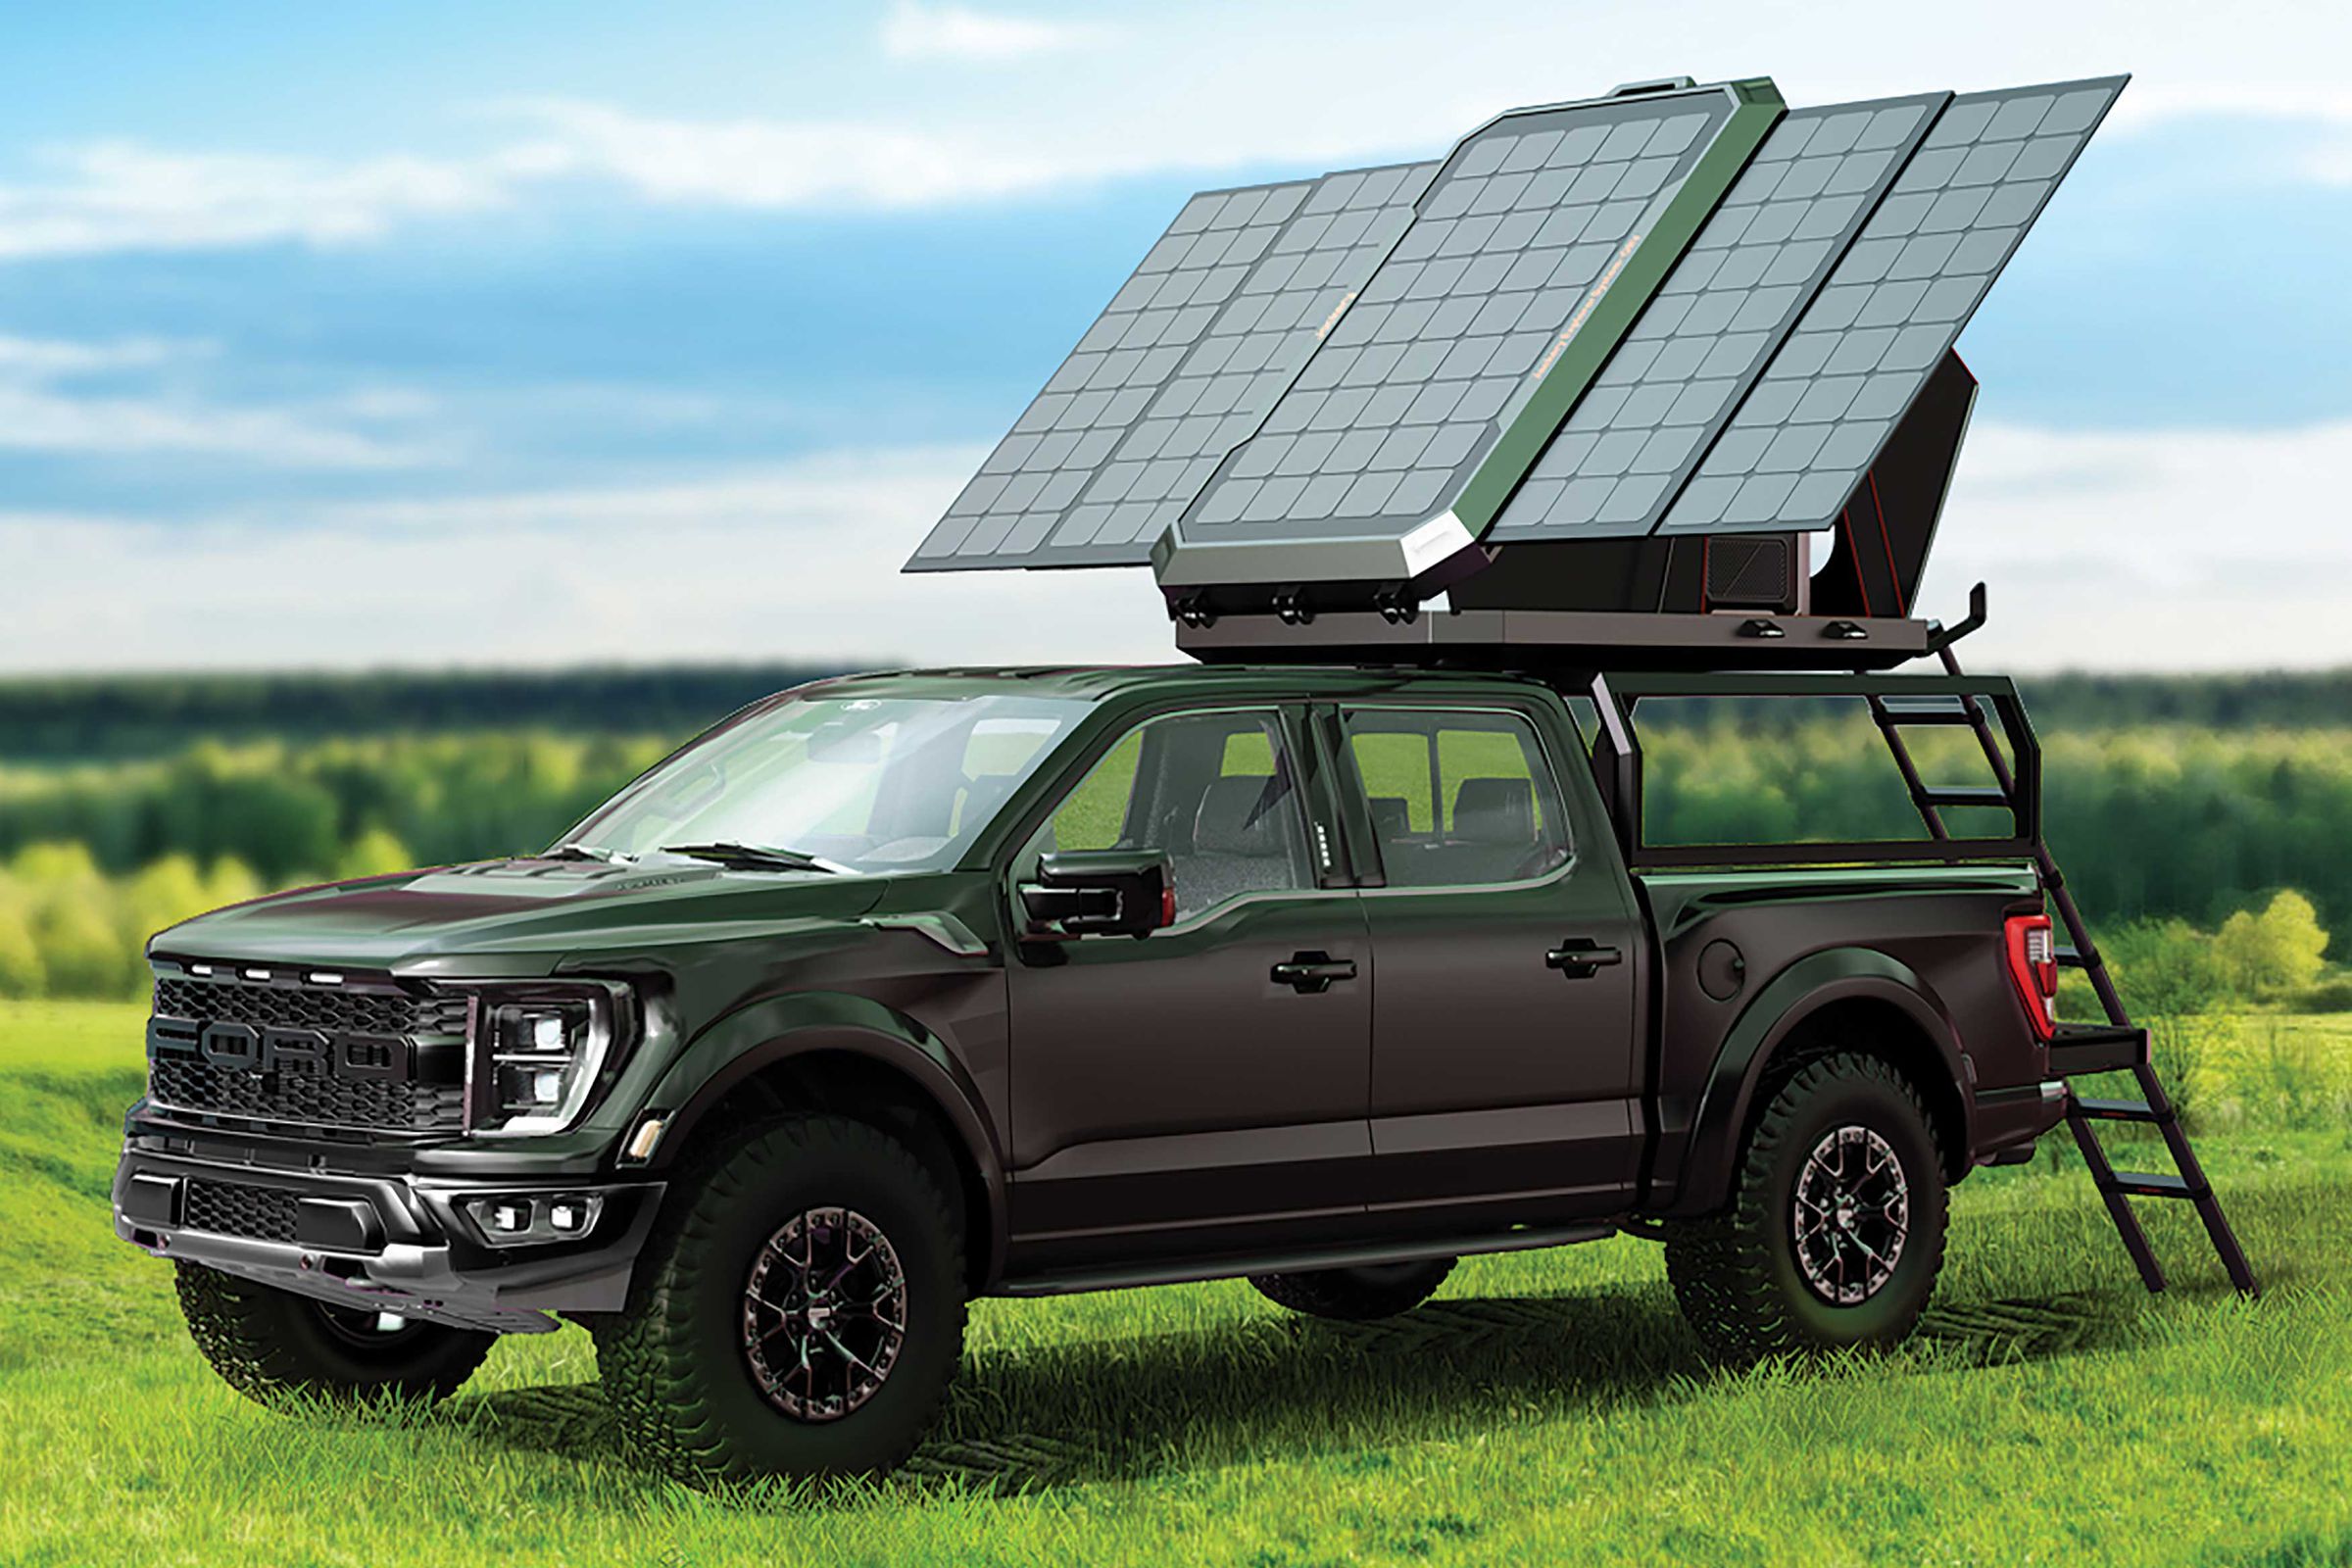 A pickup truck sits in an open field while the rooftop tent is unfurled on the truck’s roof, with the giant solar array angled at the sun.